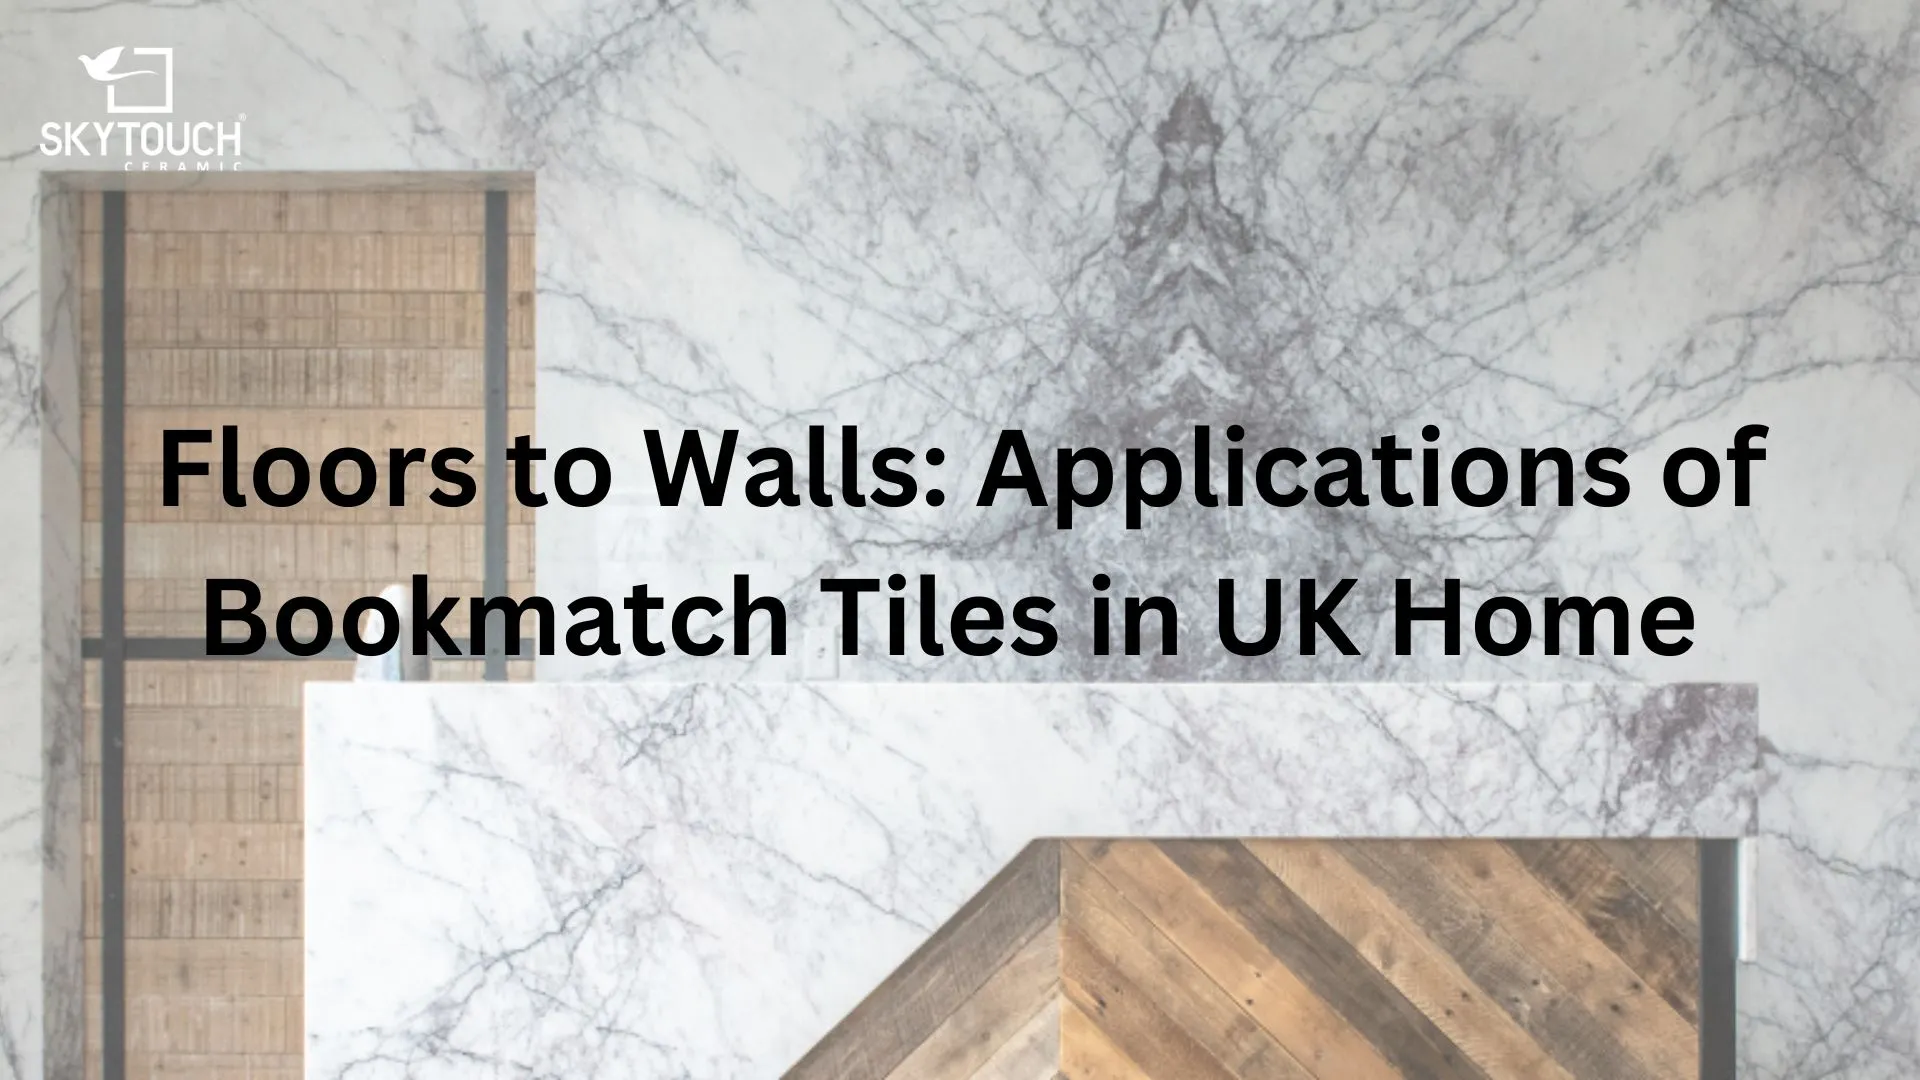 Floors to Walls: Applications of Bookmatch Tiles in UK Home